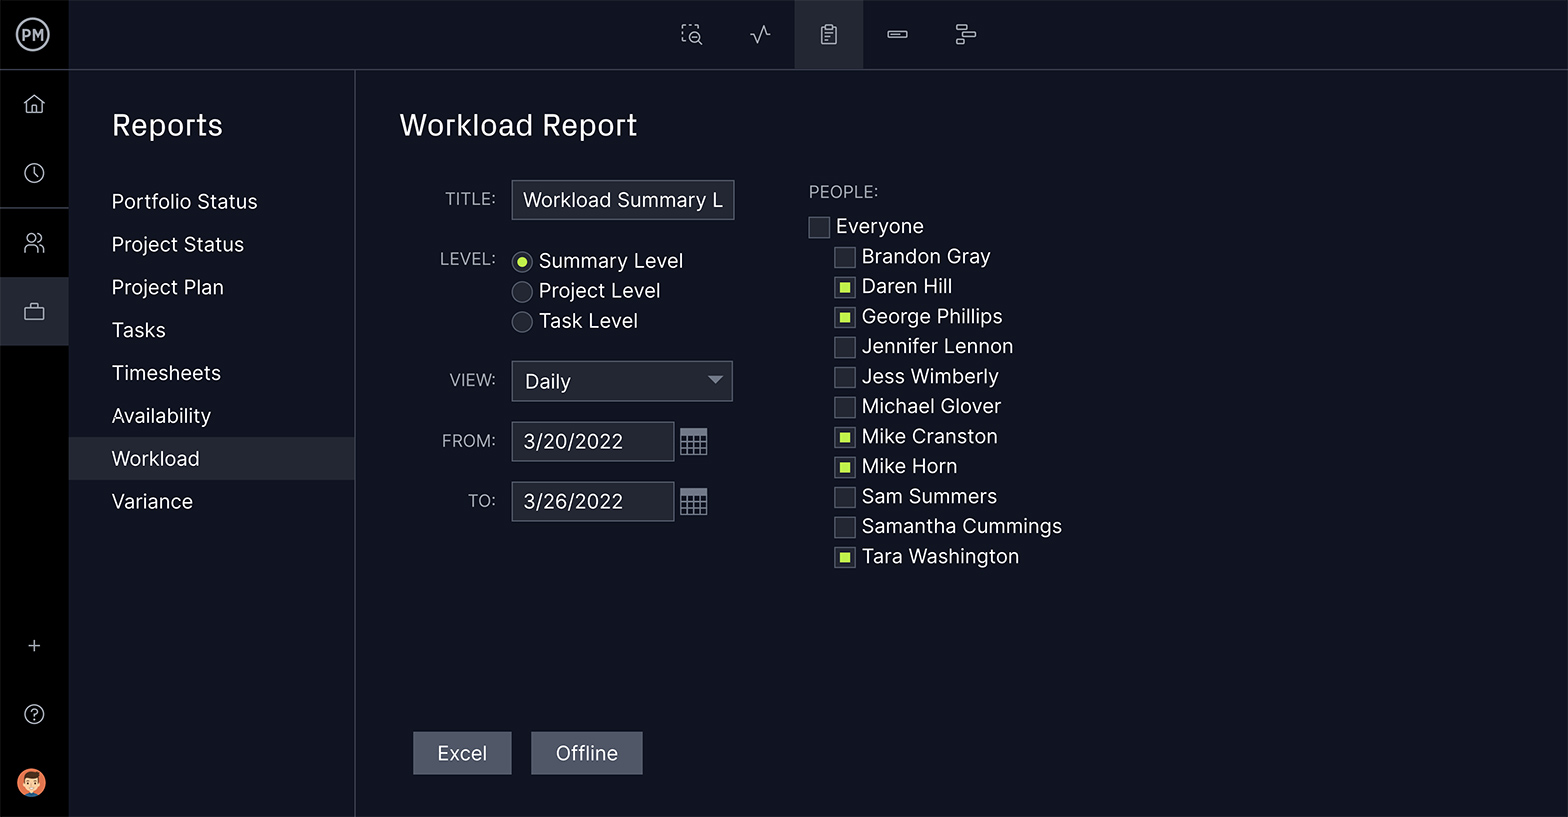 ProjectManager's workload report helps project managers with project planning